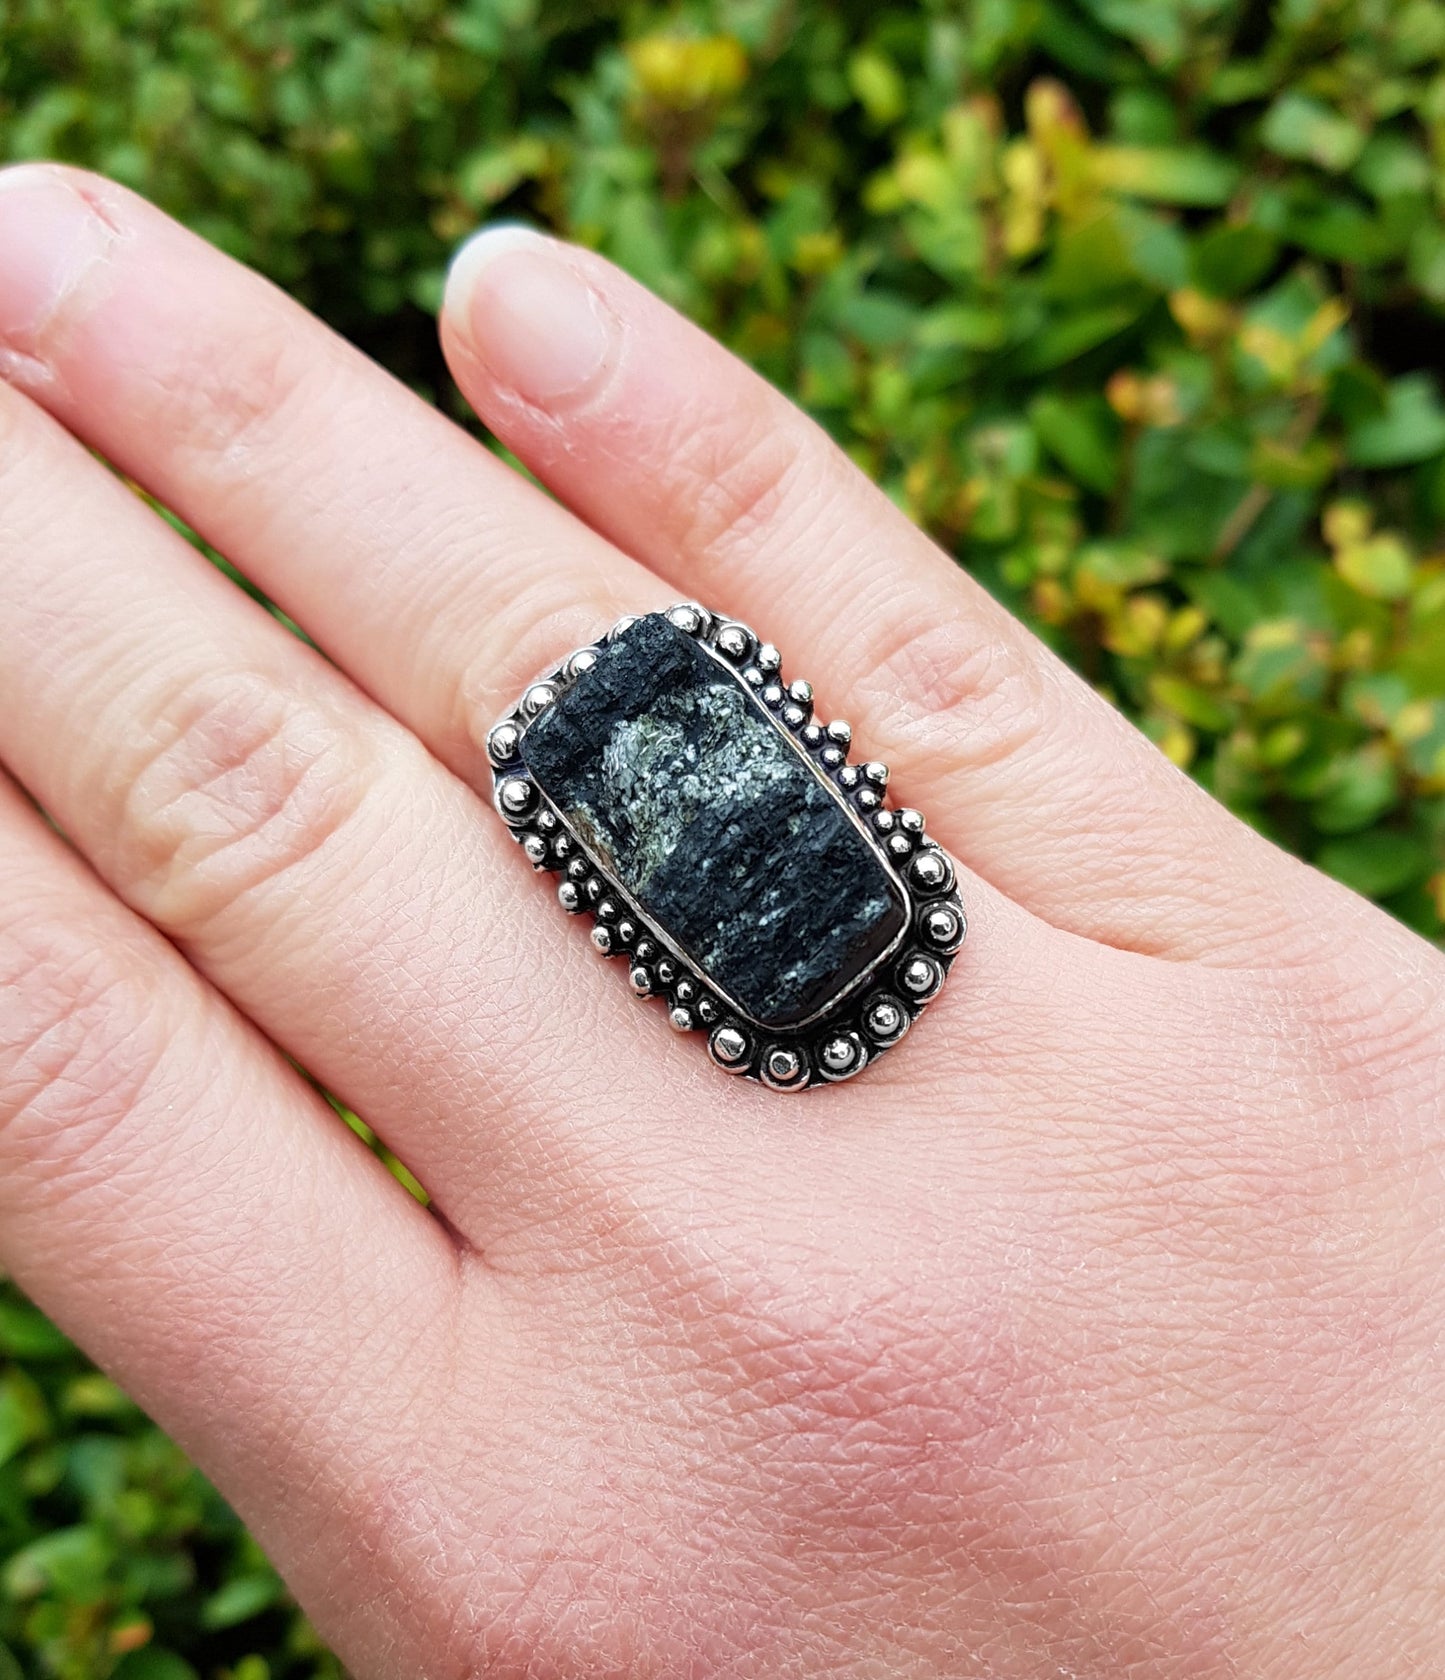 Rough Black Tourmaline Ring Size US 6 1/2 Big Statement Ring In Sterling Silver Boho Ring Ethnic Ring Unique Gift